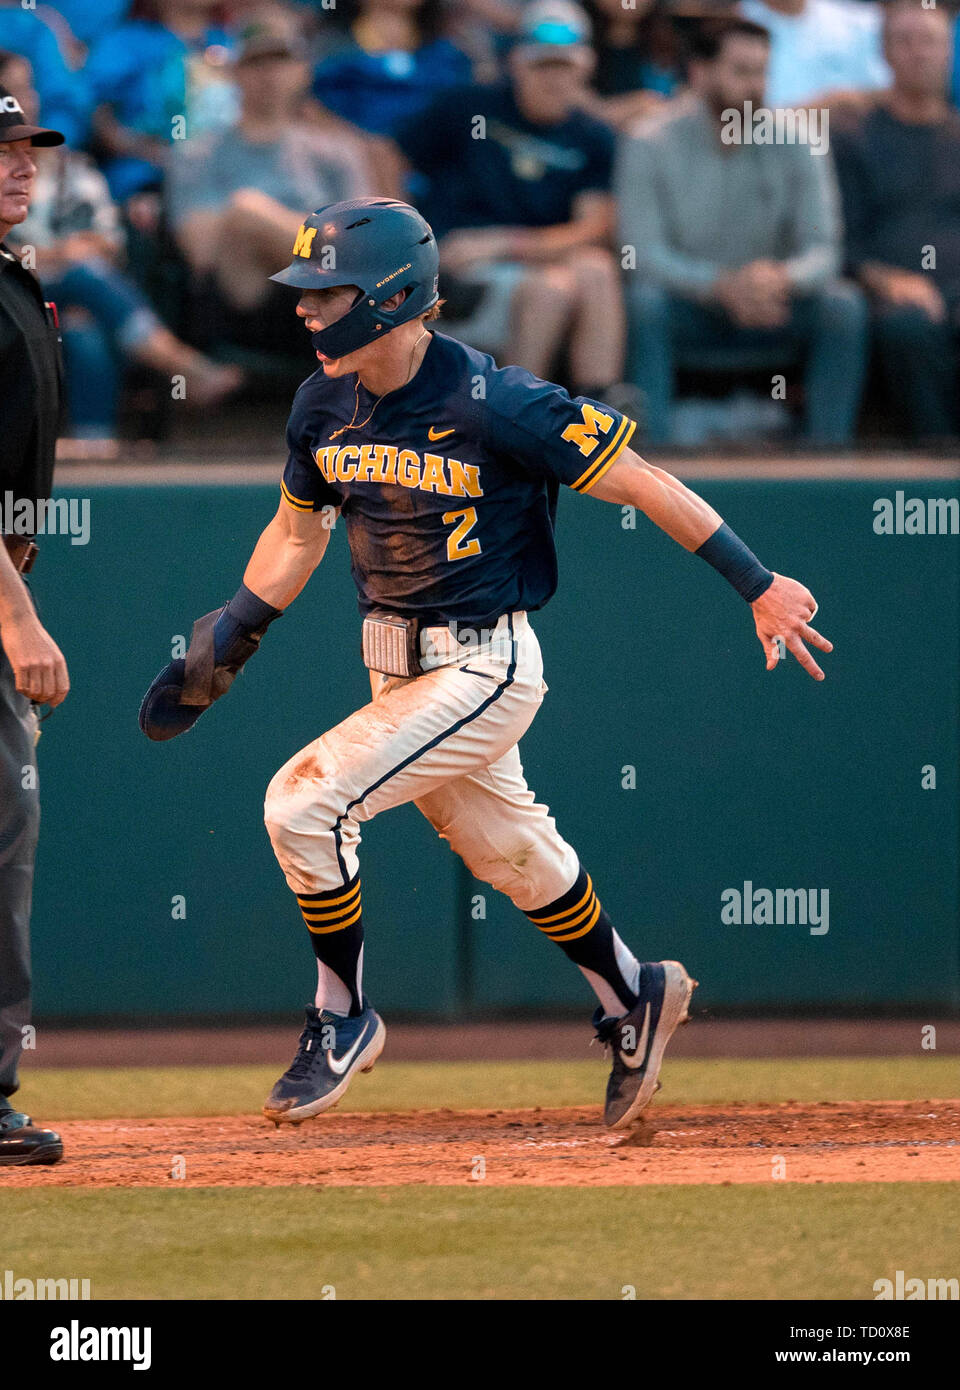 Los Angeles, CA, USA. 09th June, 2019. Michigan infielder (2) Jack Blomgren scores a run after dislocating his finger during an NCAA super regional game between the Michigan Wolverines and the UCLA Bruins at Jackie Robinson Stadium in Los Angeles, California. Michigan defeated UCLA 4-2. (Mandatory Credit: Juan Lainez/MarinMedia.org/Cal Sport Media) Credit: csm/Alamy Live News Stock Photo